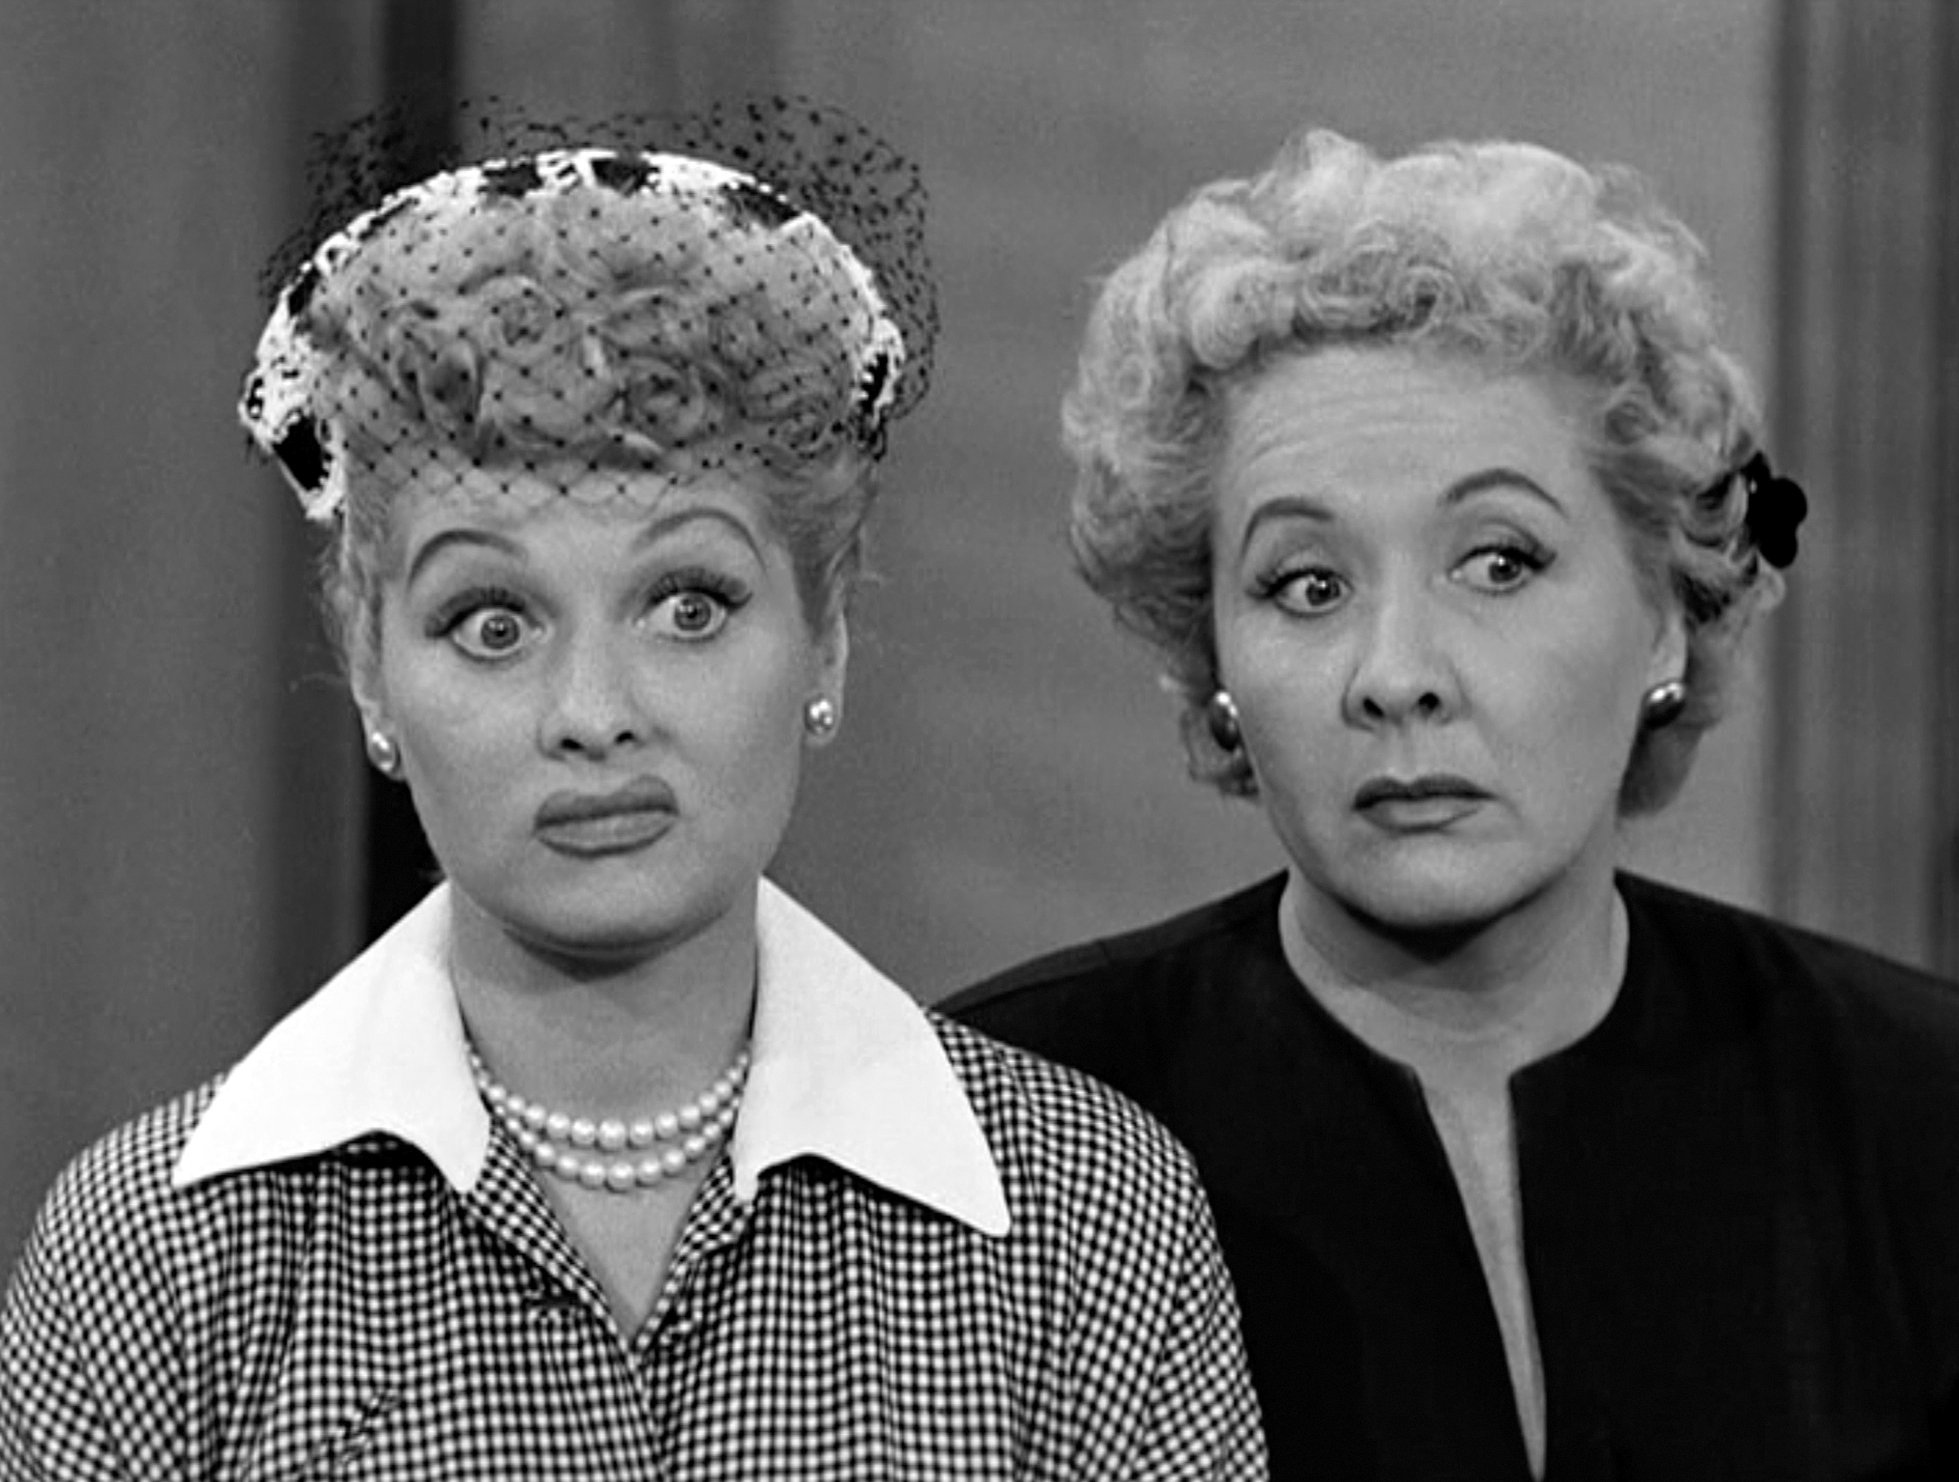 Lucille Ball and Vivian Vance in front of a wall